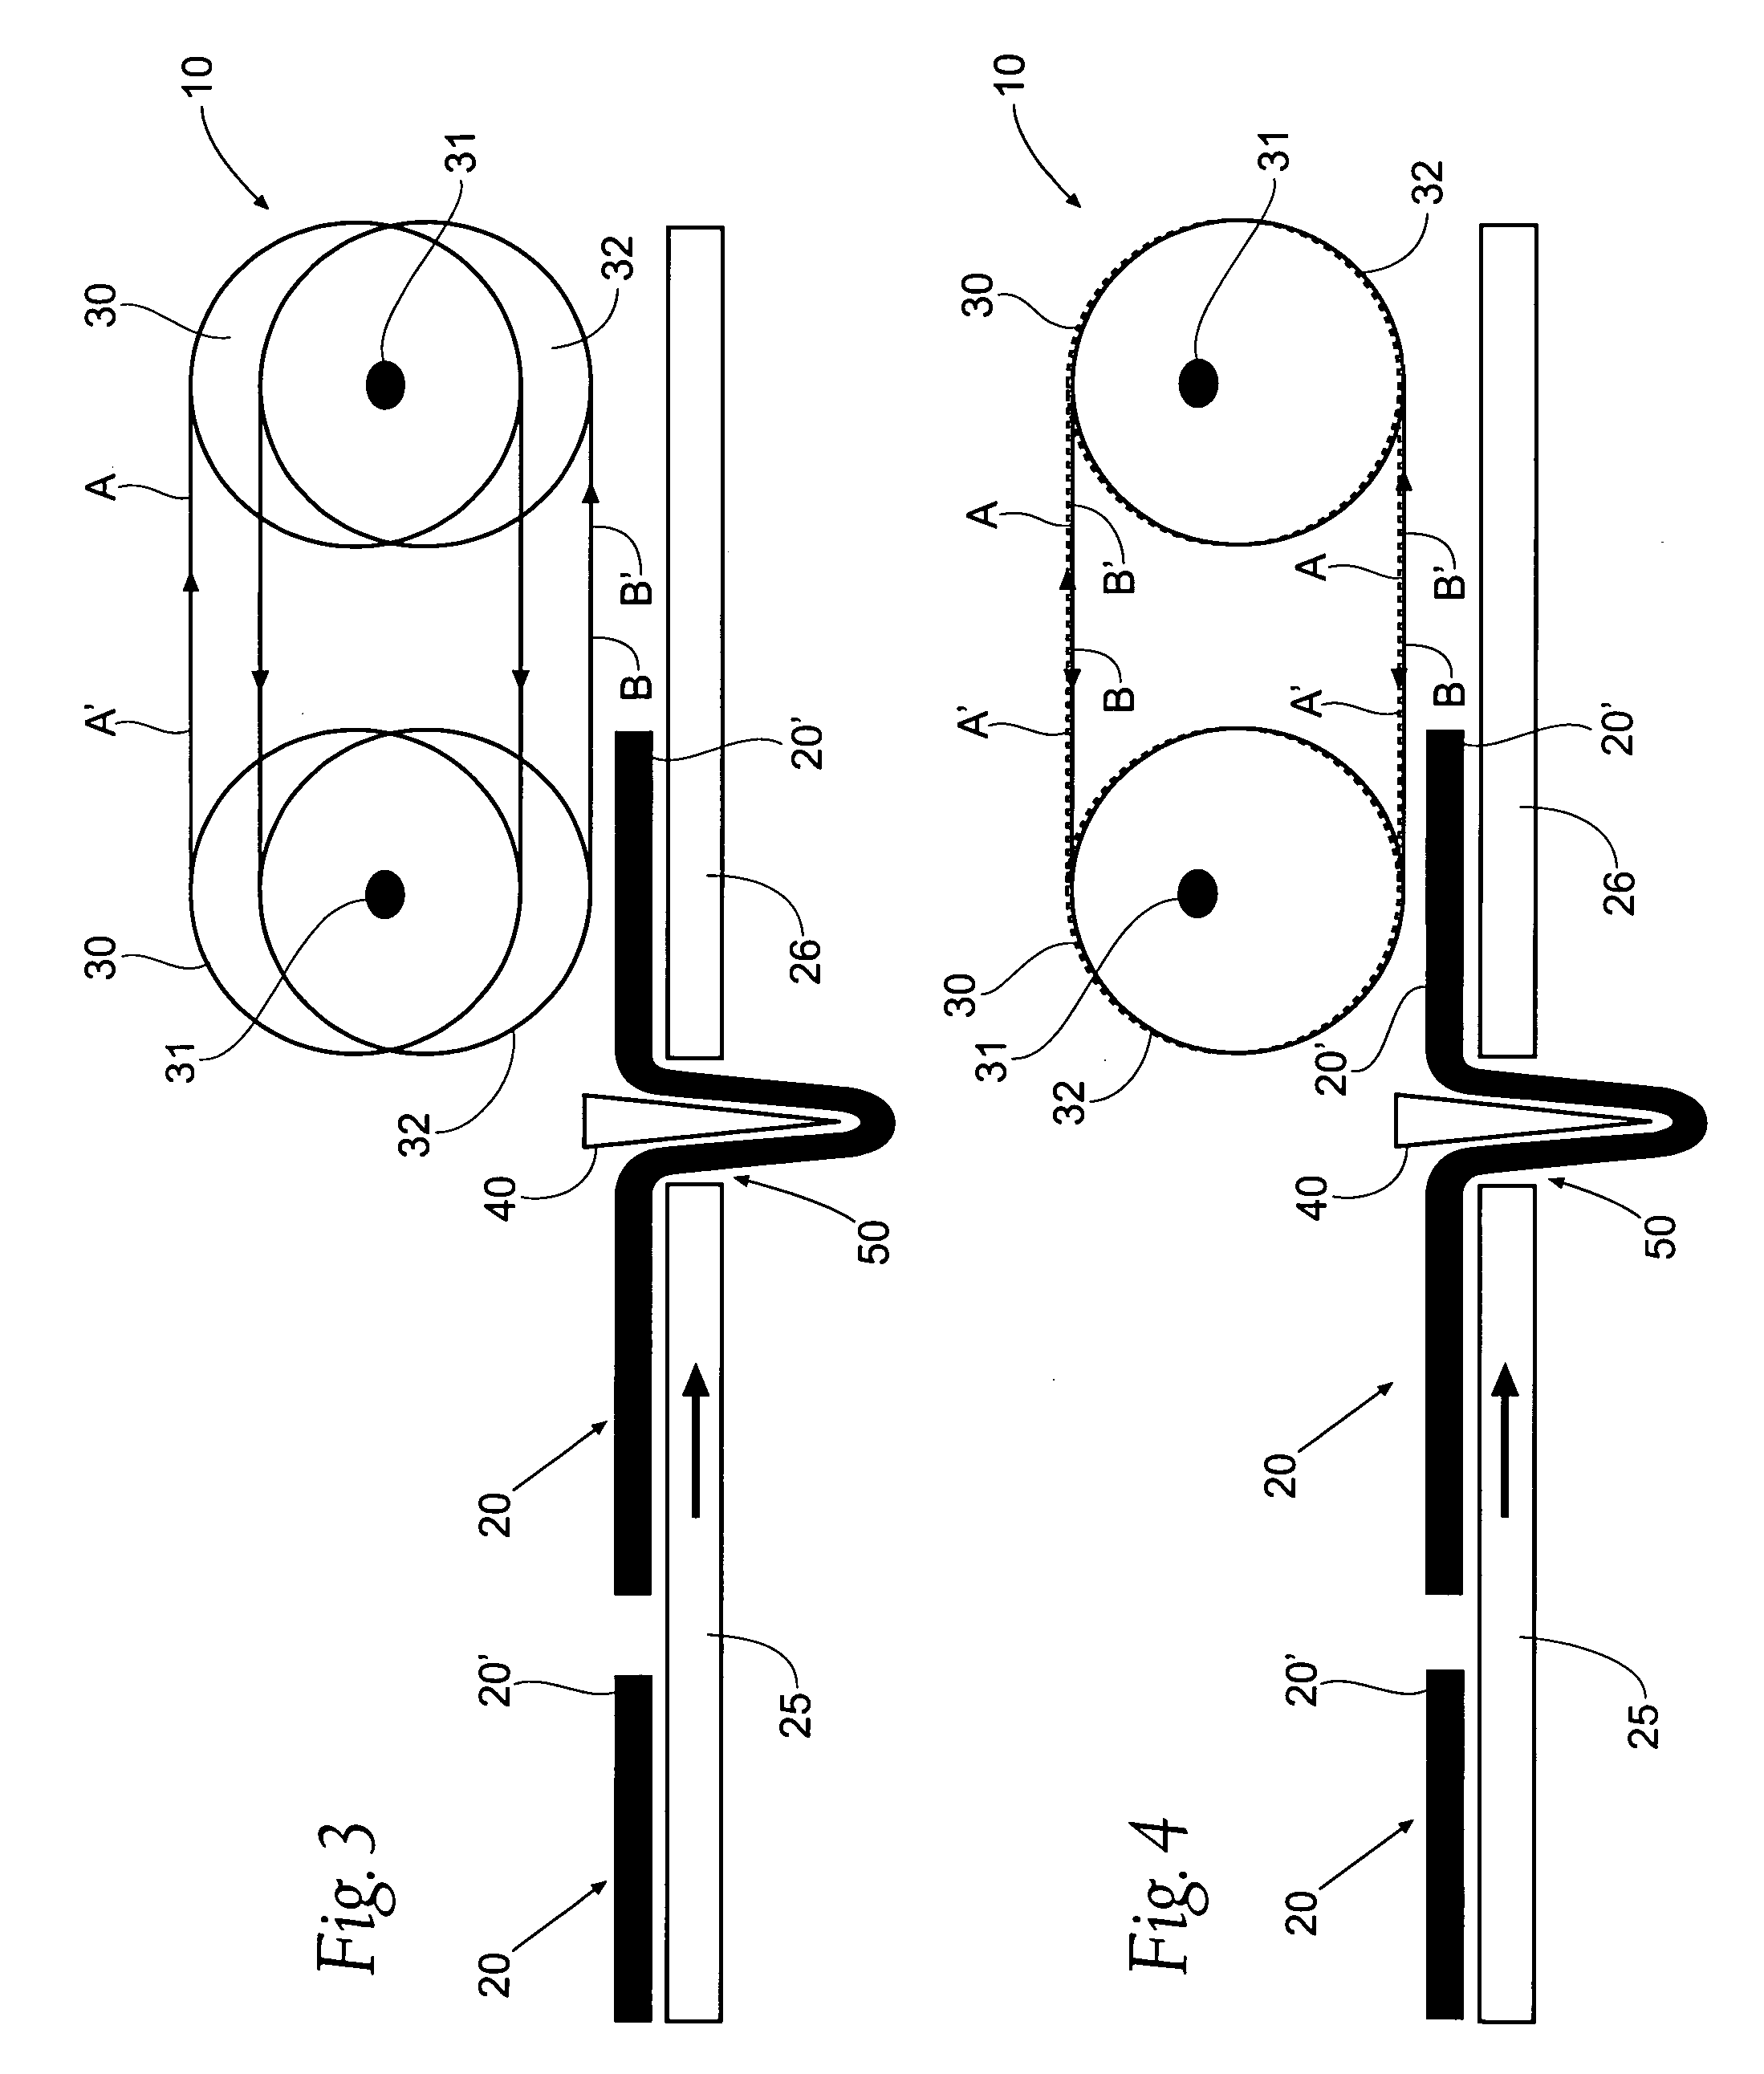 Method and apparatus for changing speed or direction of an article